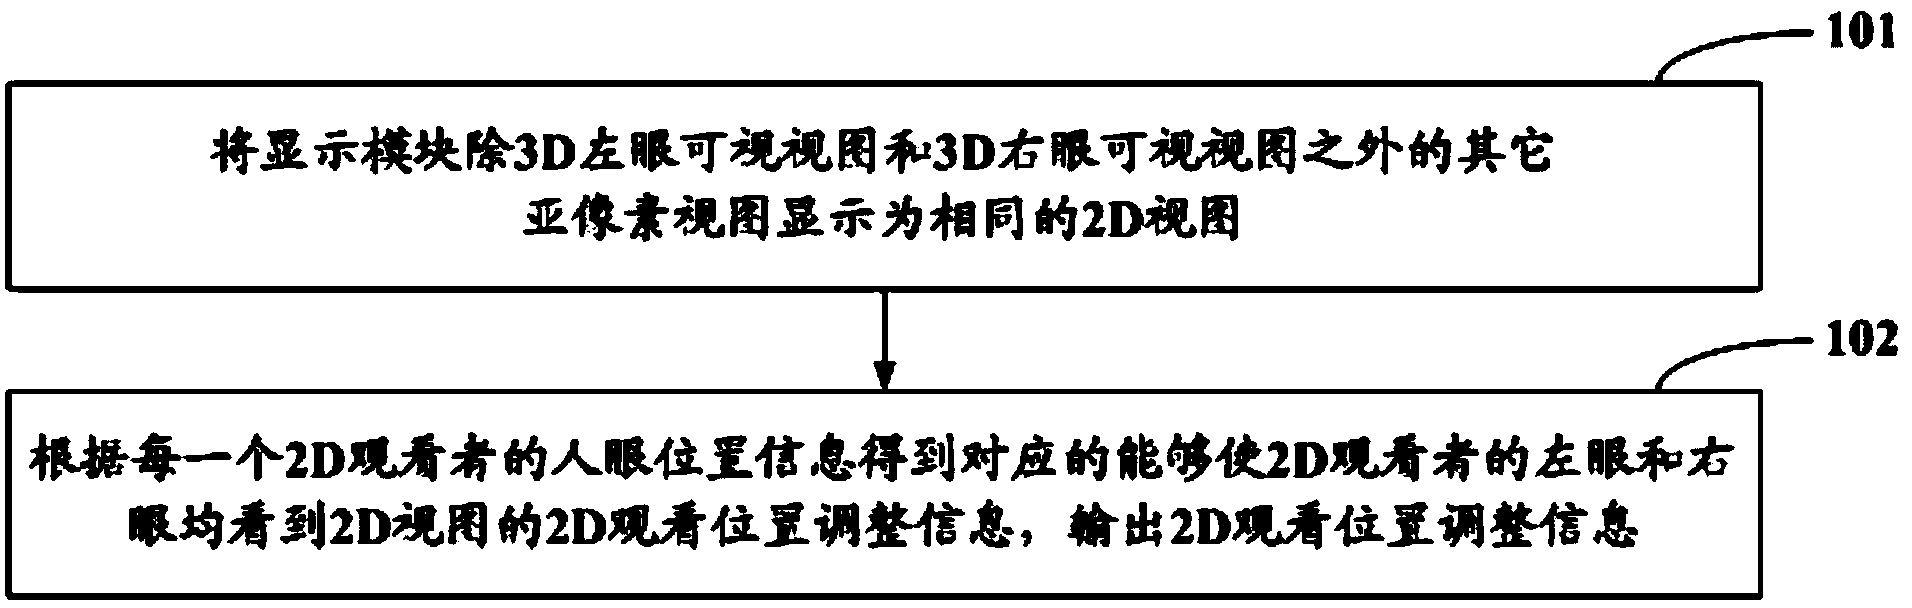 Display control method, apparatus and system